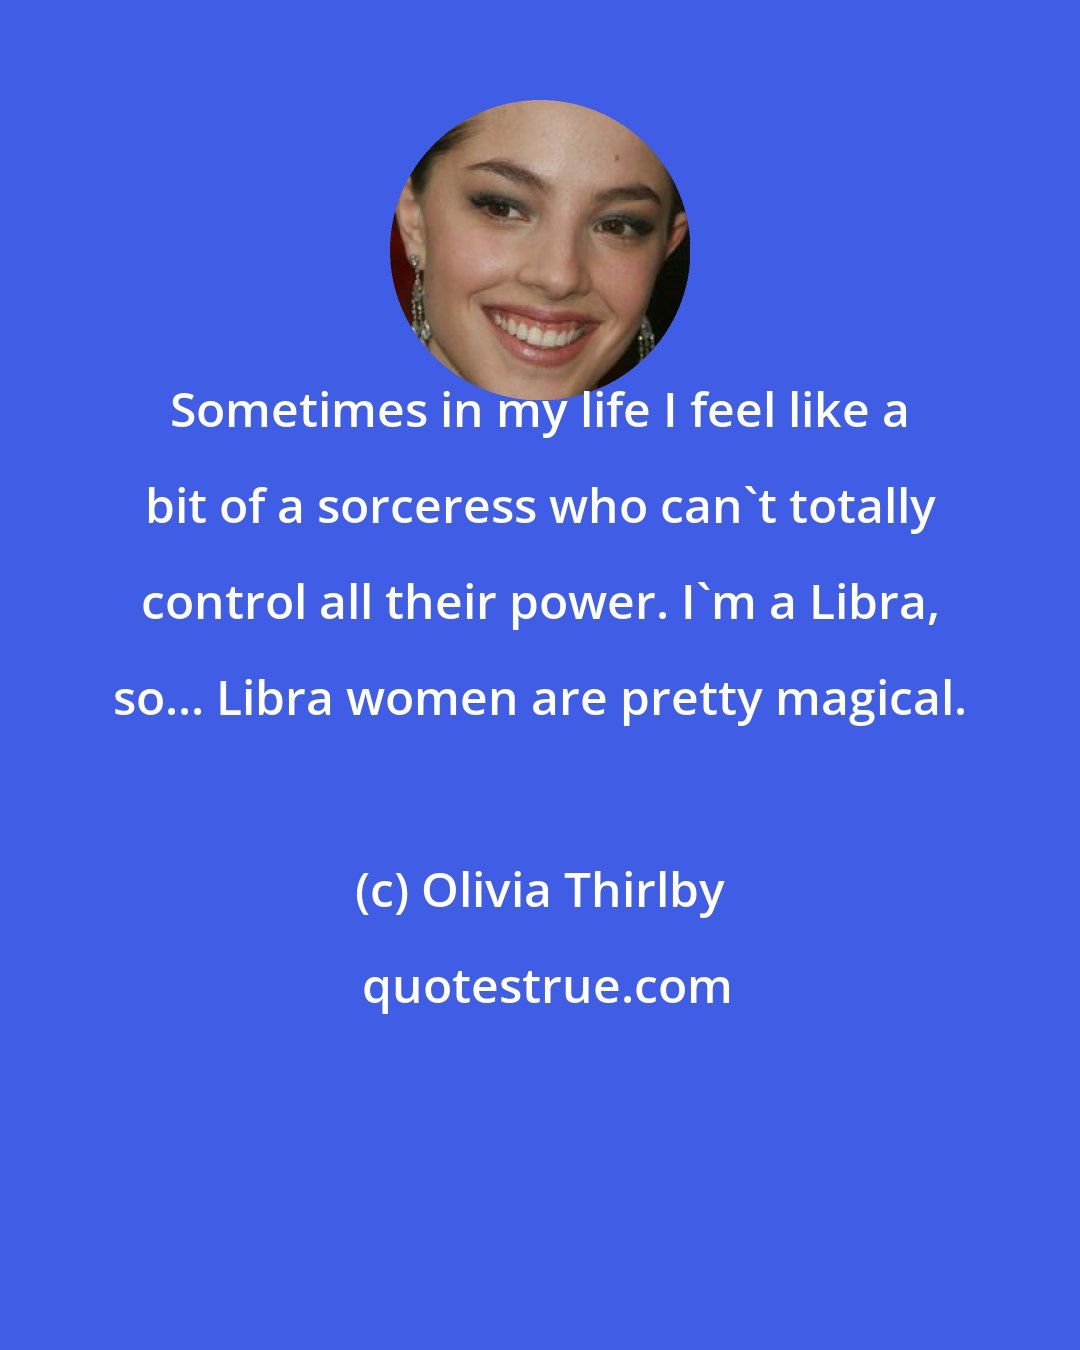 Olivia Thirlby: Sometimes in my life I feel like a bit of a sorceress who can't totally control all their power. I'm a Libra, so... Libra women are pretty magical.